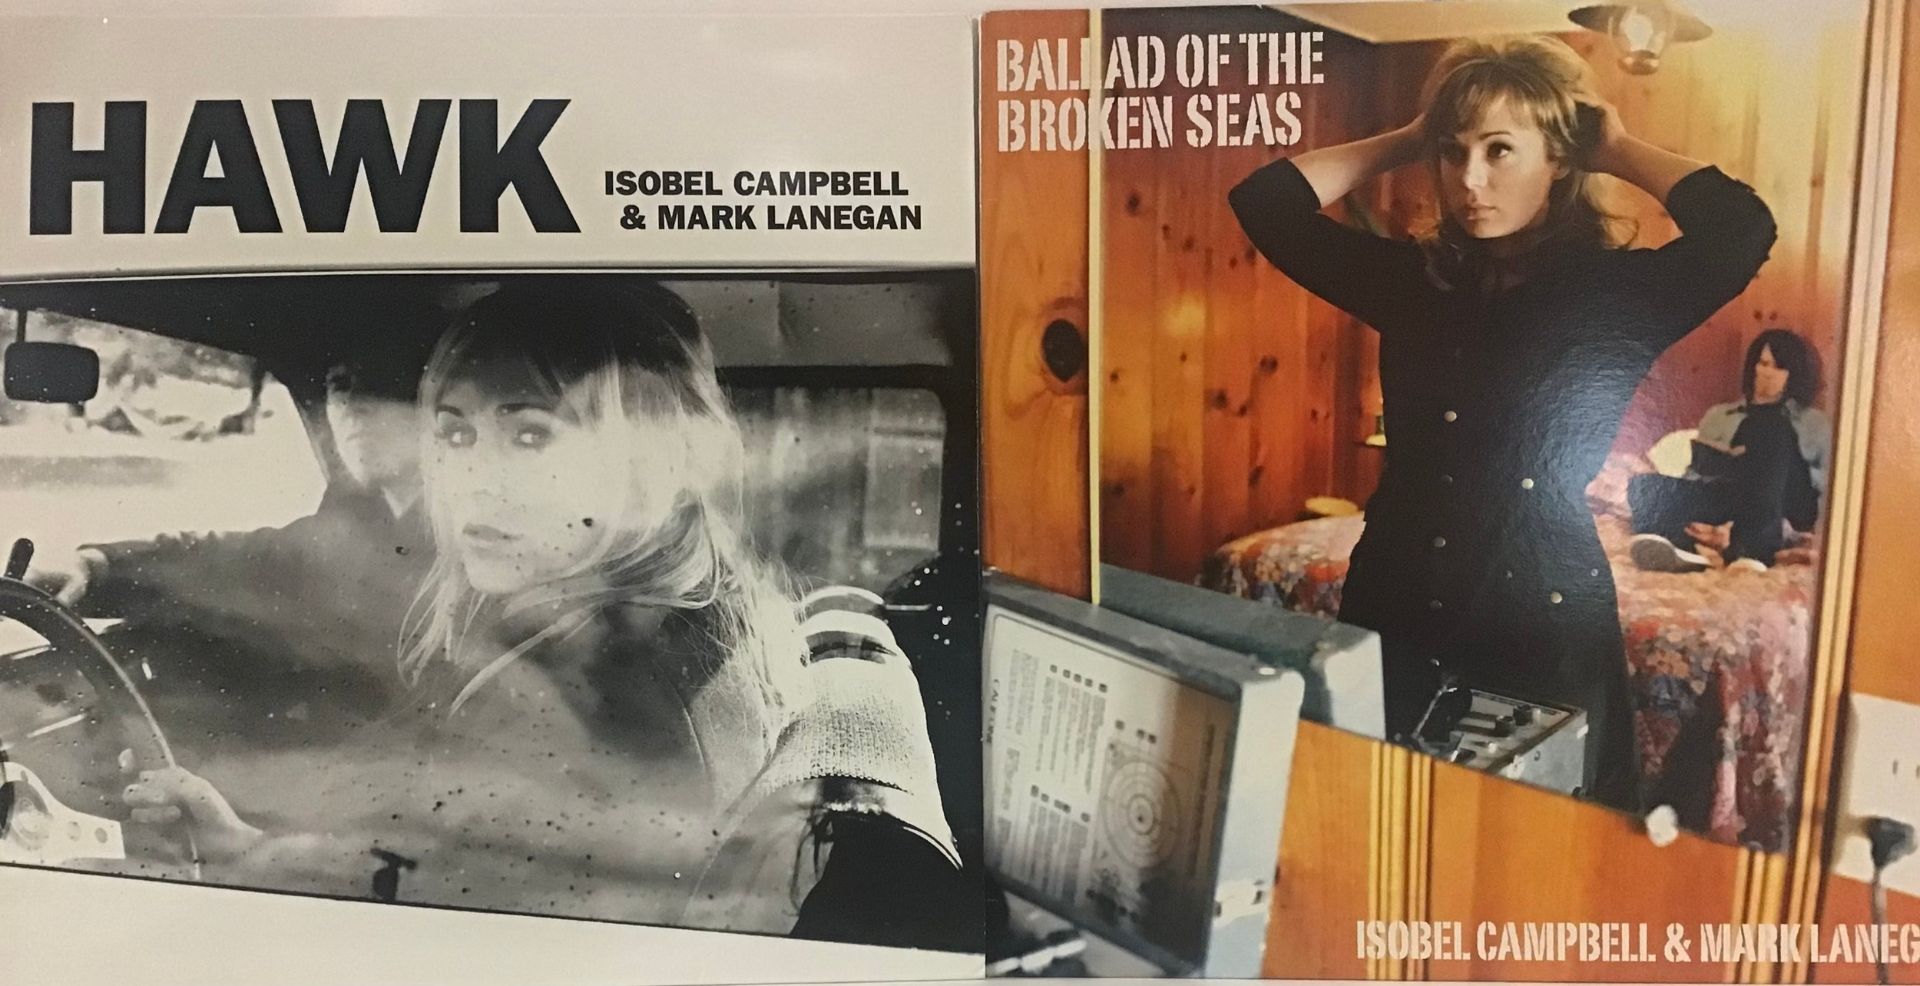 ISOBEL CAMPBELL AND MARK LANEGAN VINYL LP’S X 2. Found here both in Excellent condition with plain